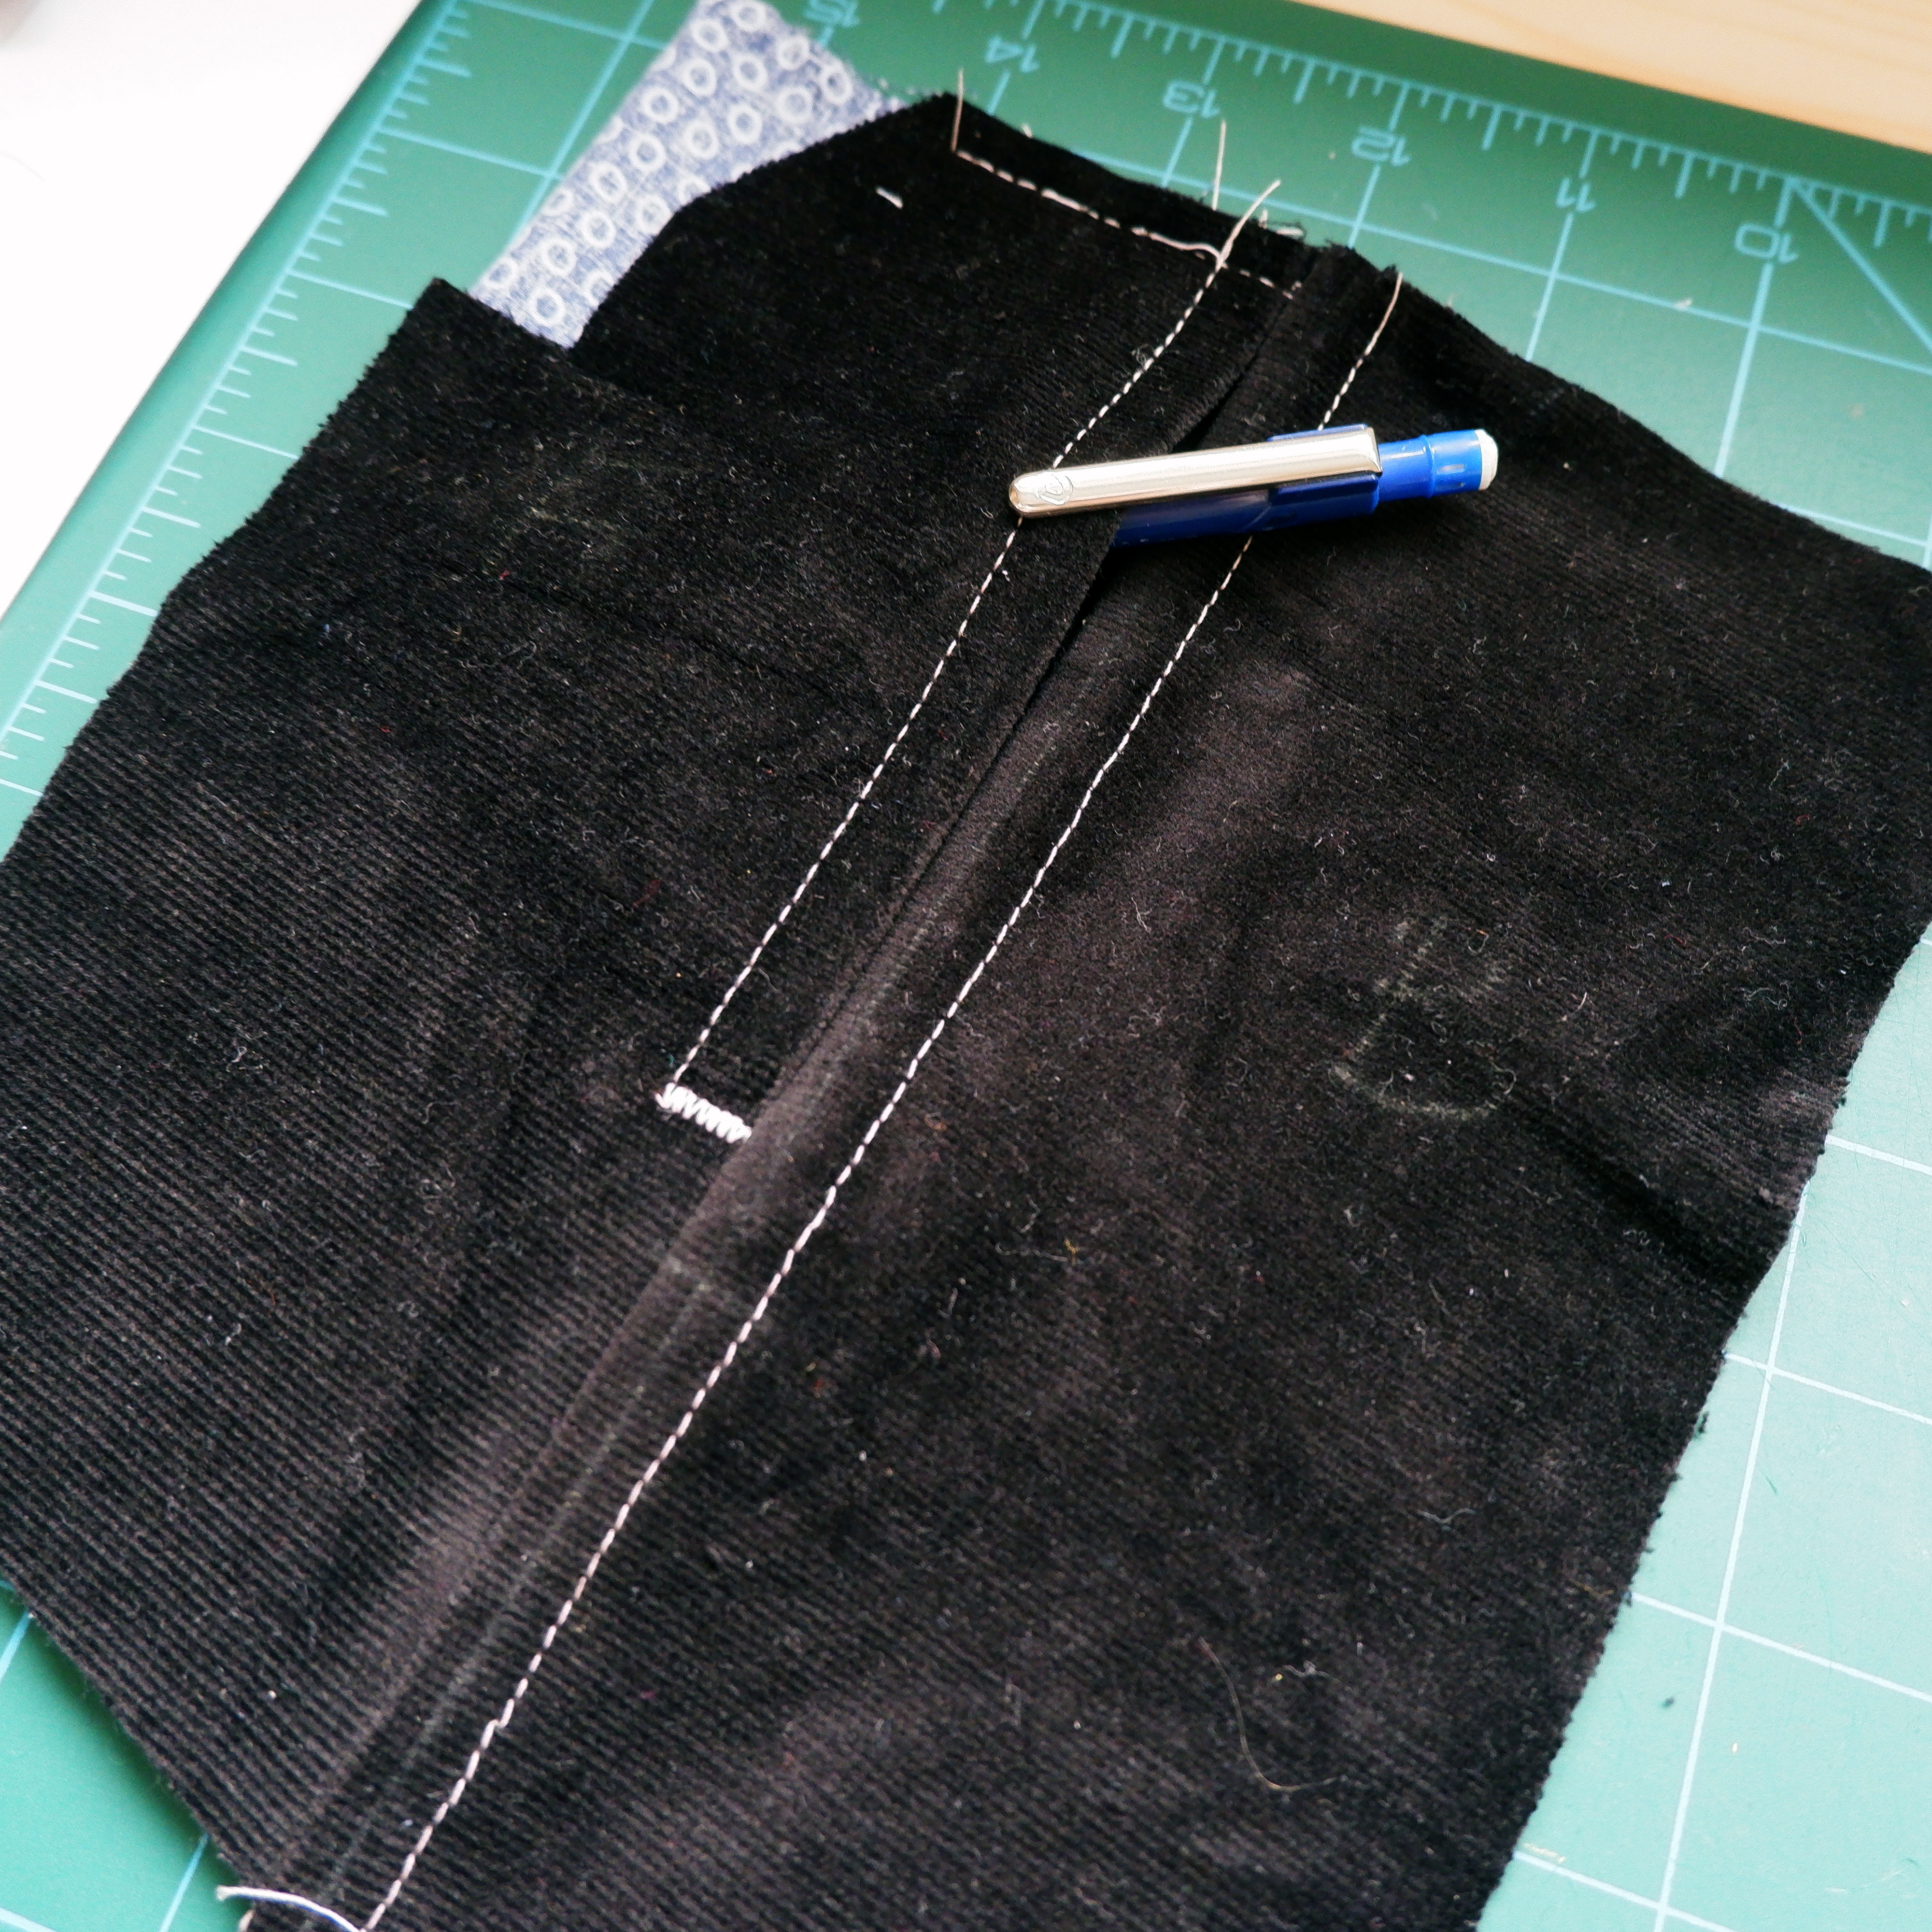 Download Tutorial: How to Sew a Flat-Felled Seam with an In-seam Pocket